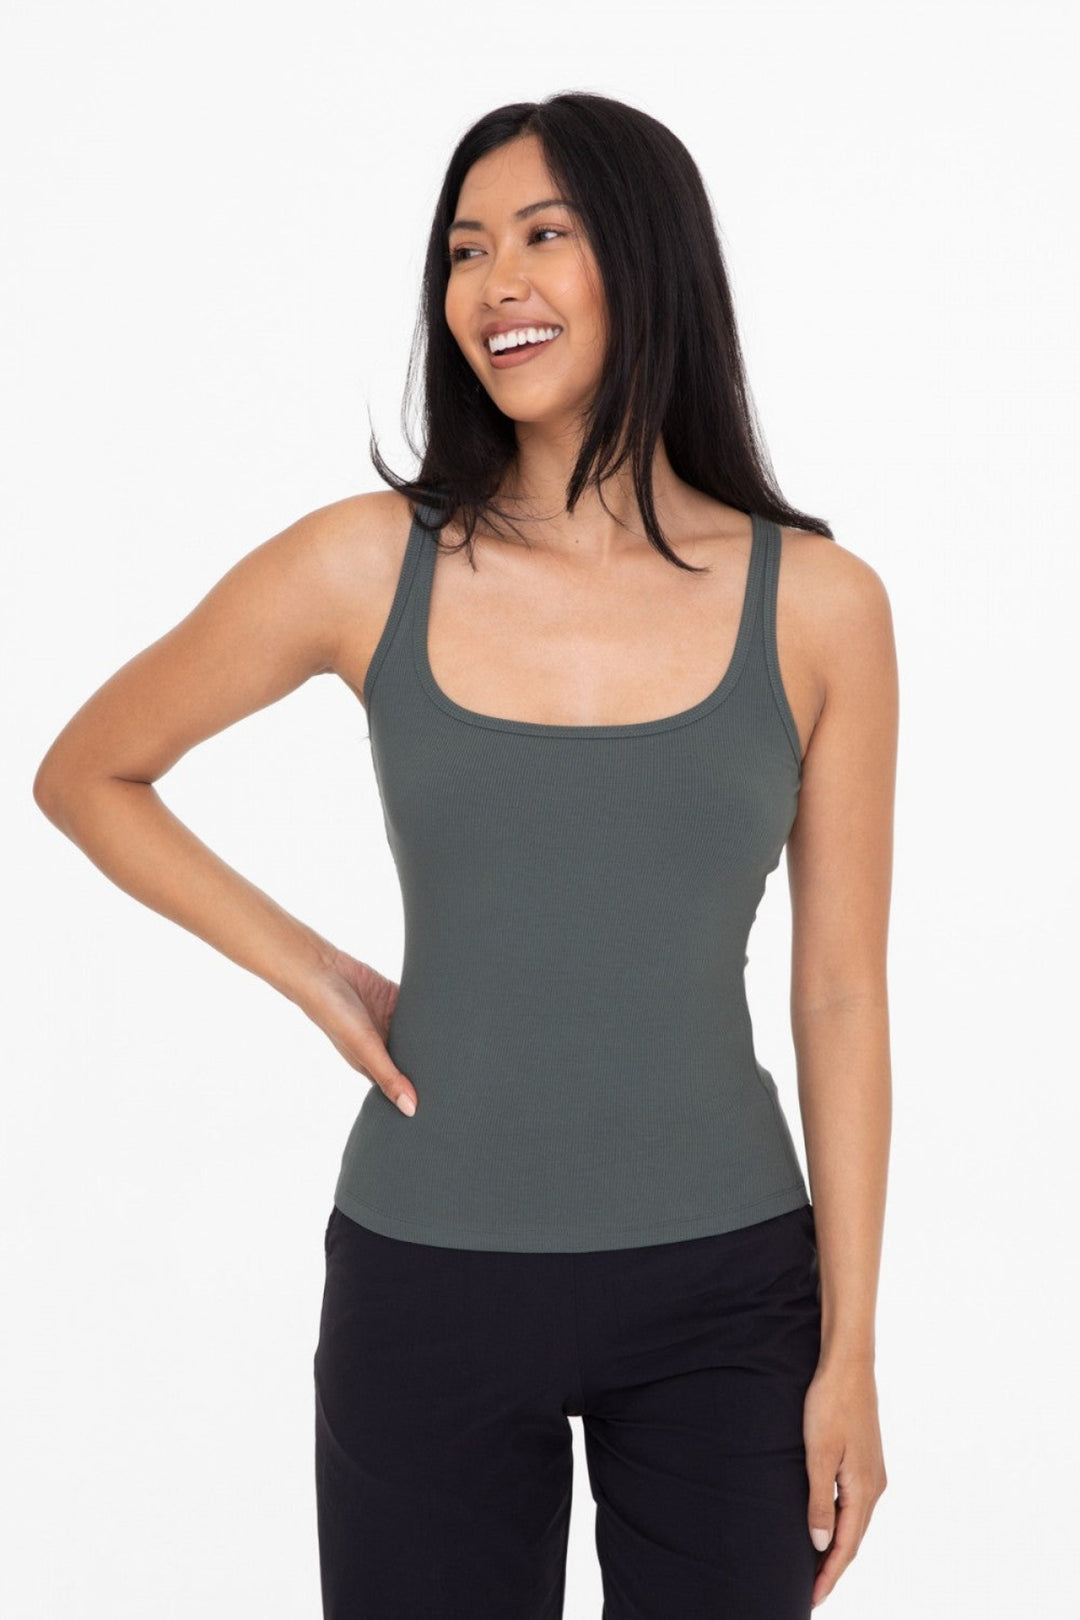 Made from a rayon blend for a soft touch, this classic rib tank top is your next go to piece. The square neck and slim strap combination is ultra flattering and makes this piece perfect for layering